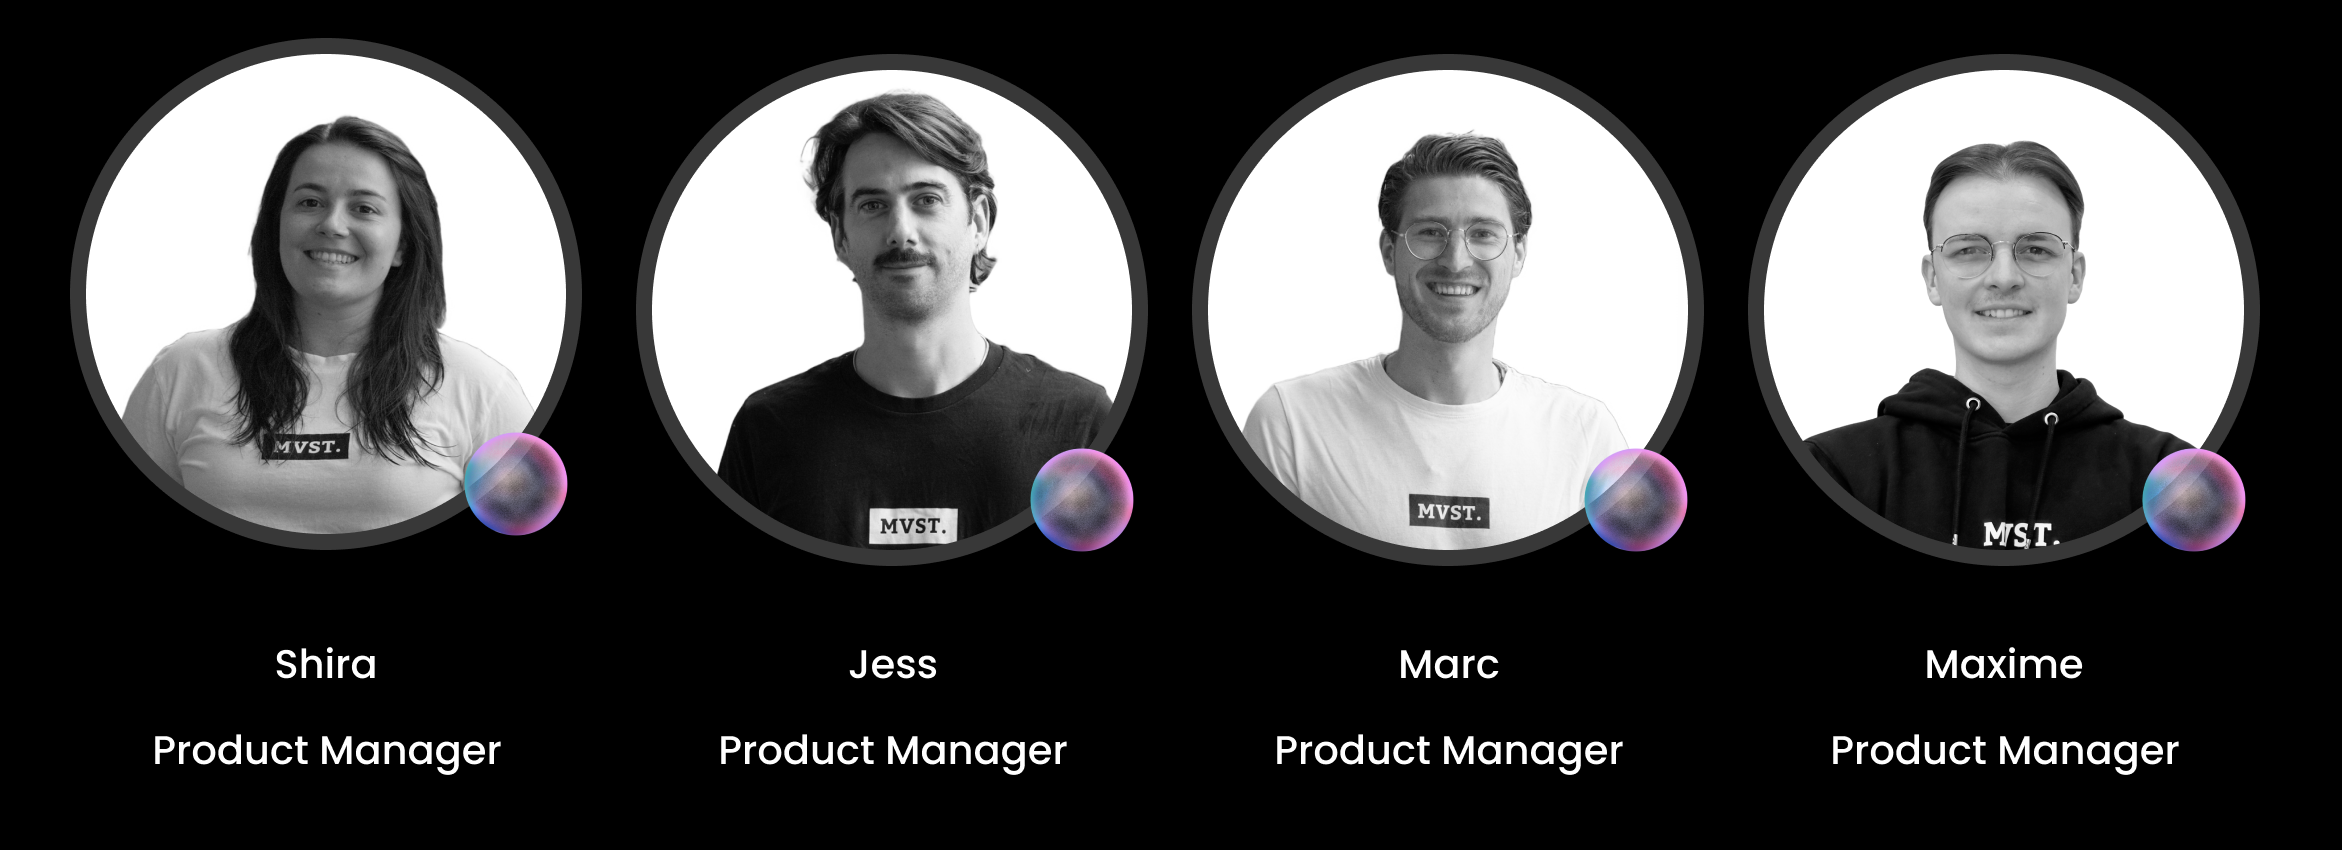 Photos, Names, and Roles of the Product Managers Team at MVST